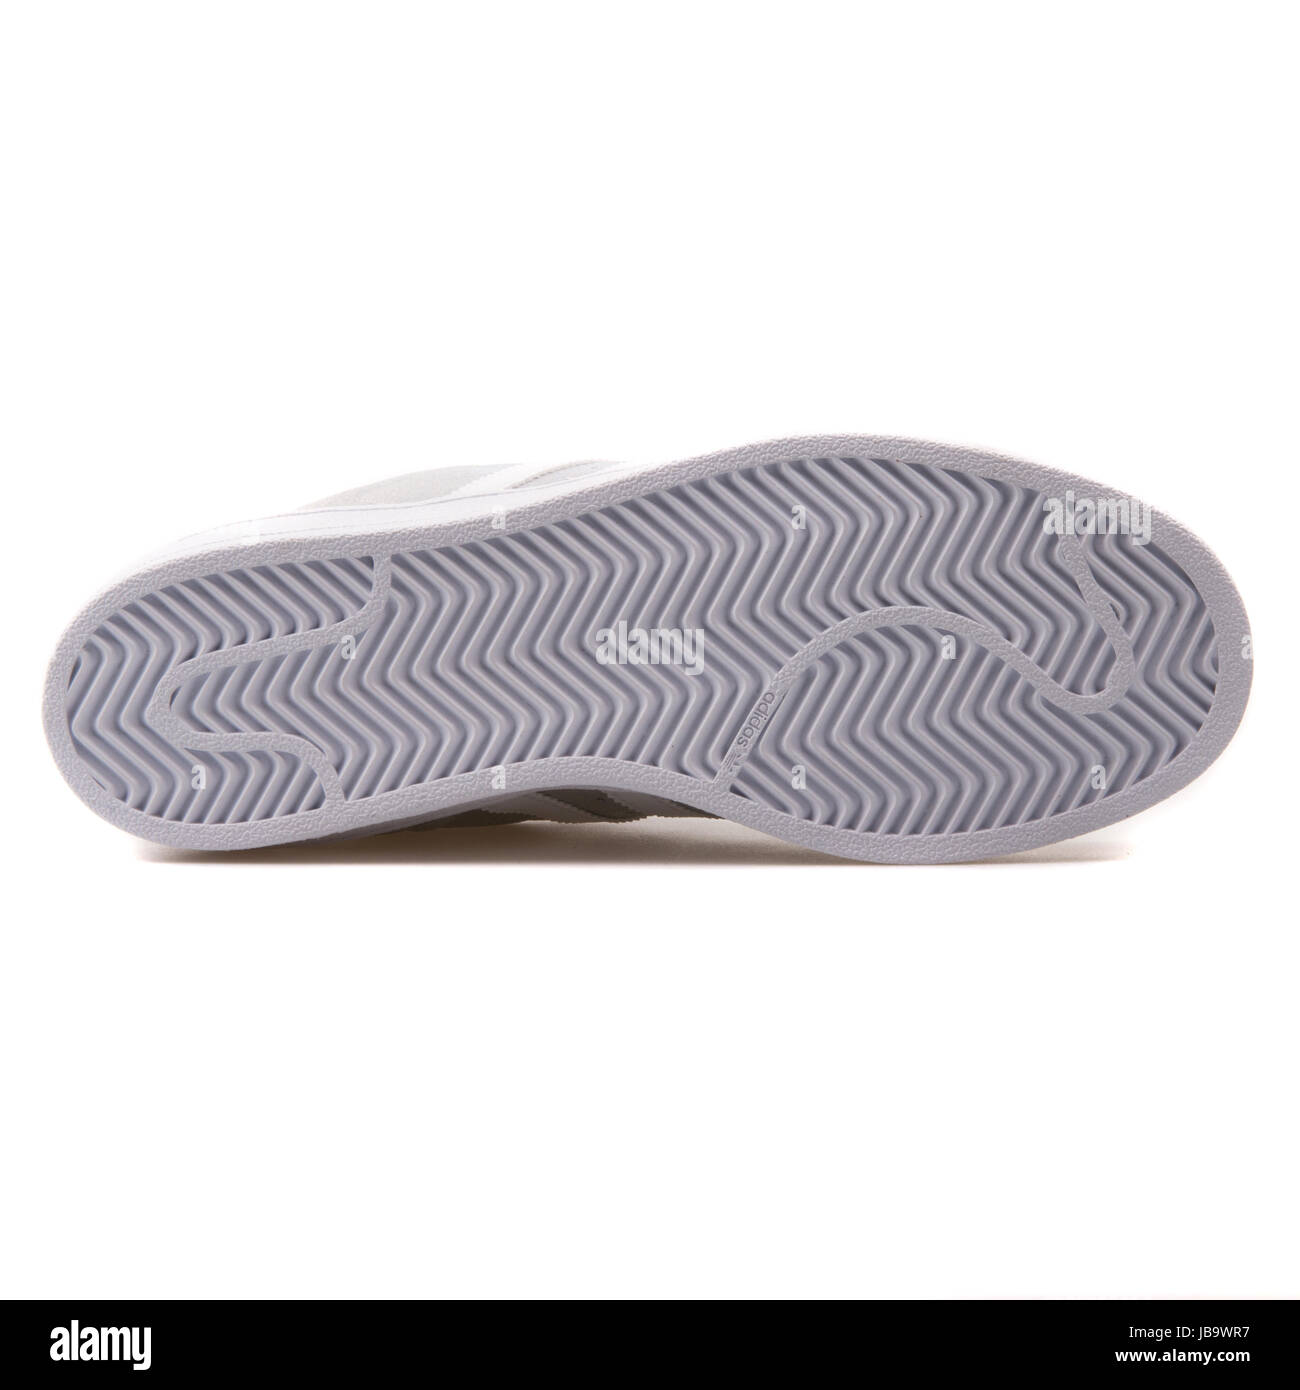 Adidas Superstar W irisée hologramme Chaussures pour femmes - S81644 Photo  Stock - Alamy